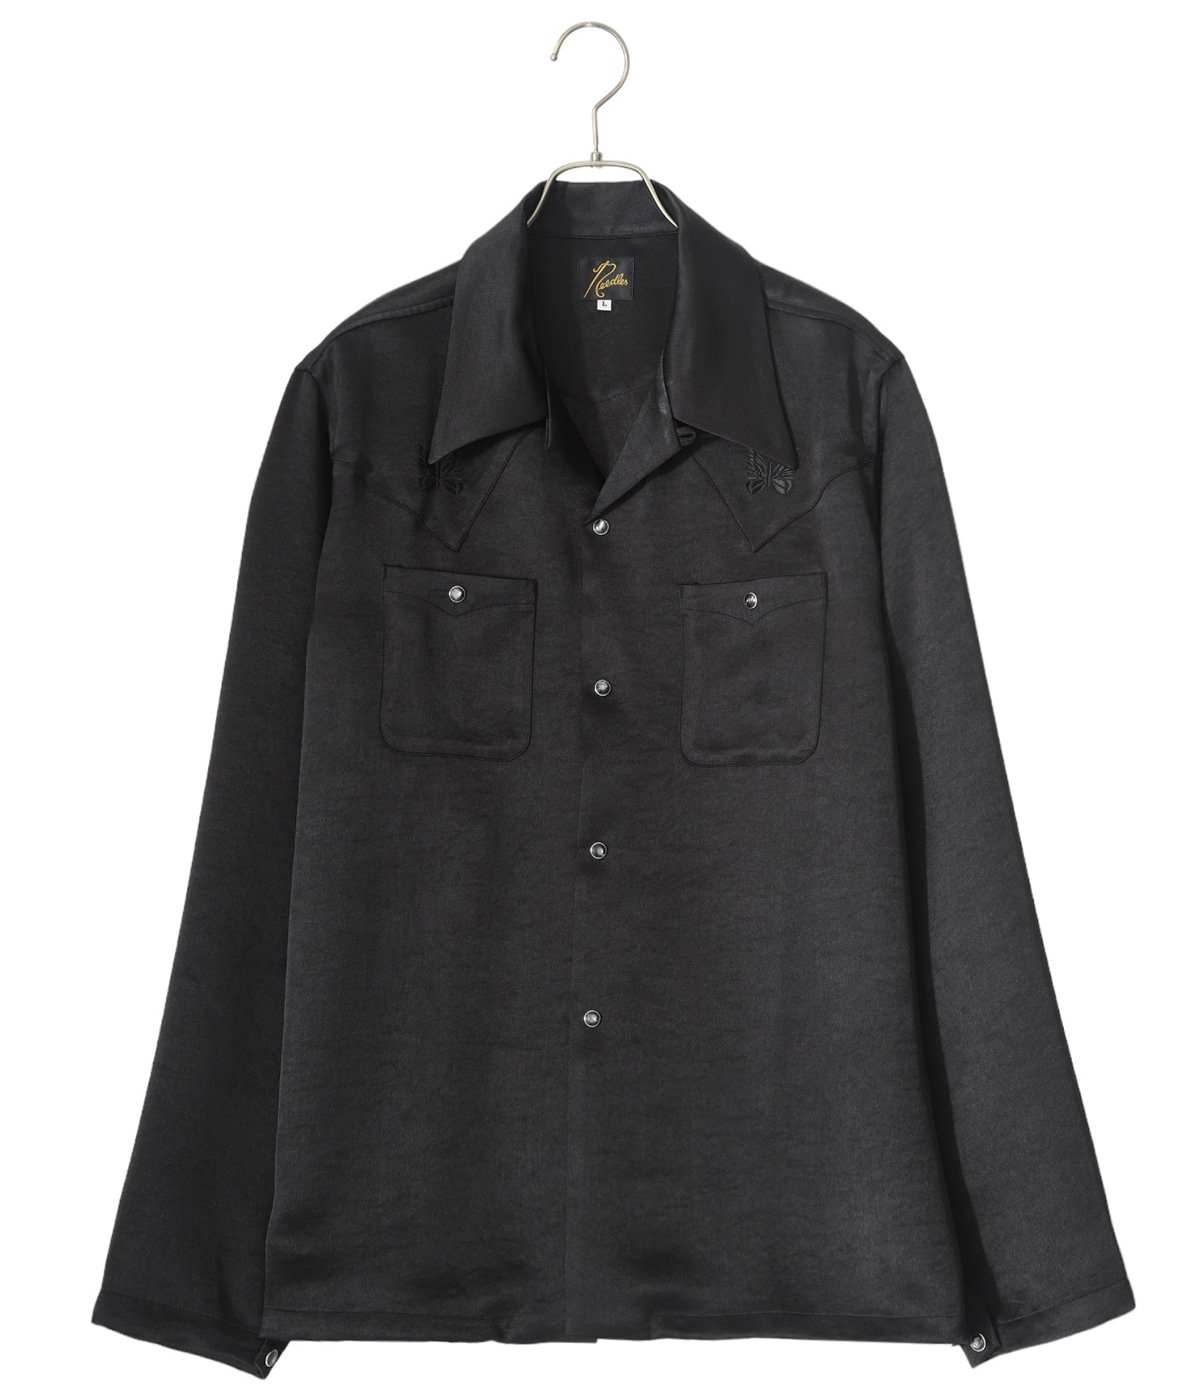 T-Pablow 着用 Needles COWBOY ONE-UP SHIRT - csihealth.net